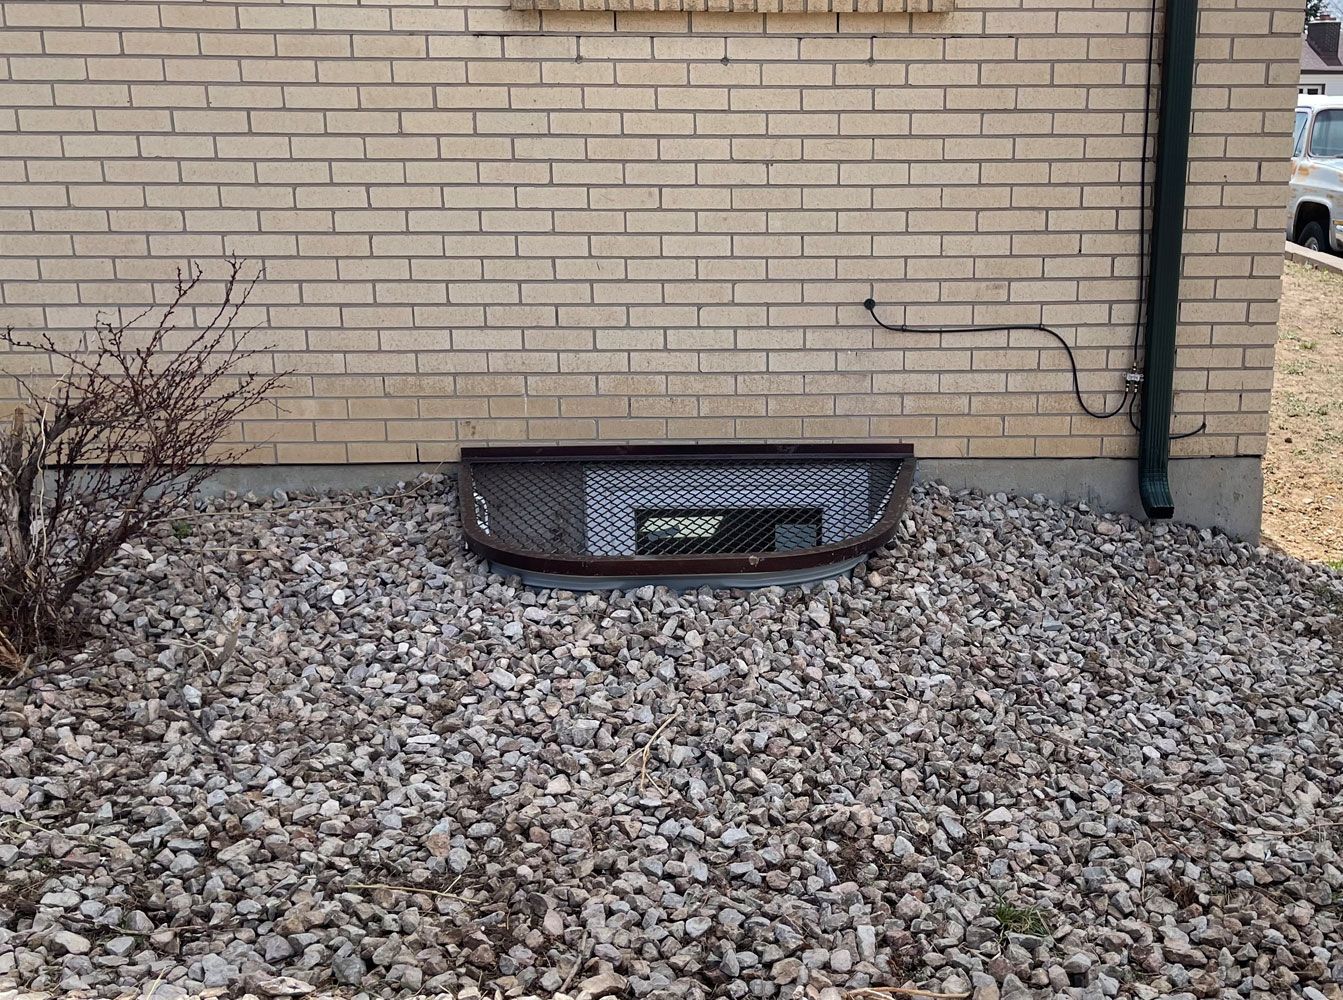 A window well in the side of a brick building surrounded by gravel.